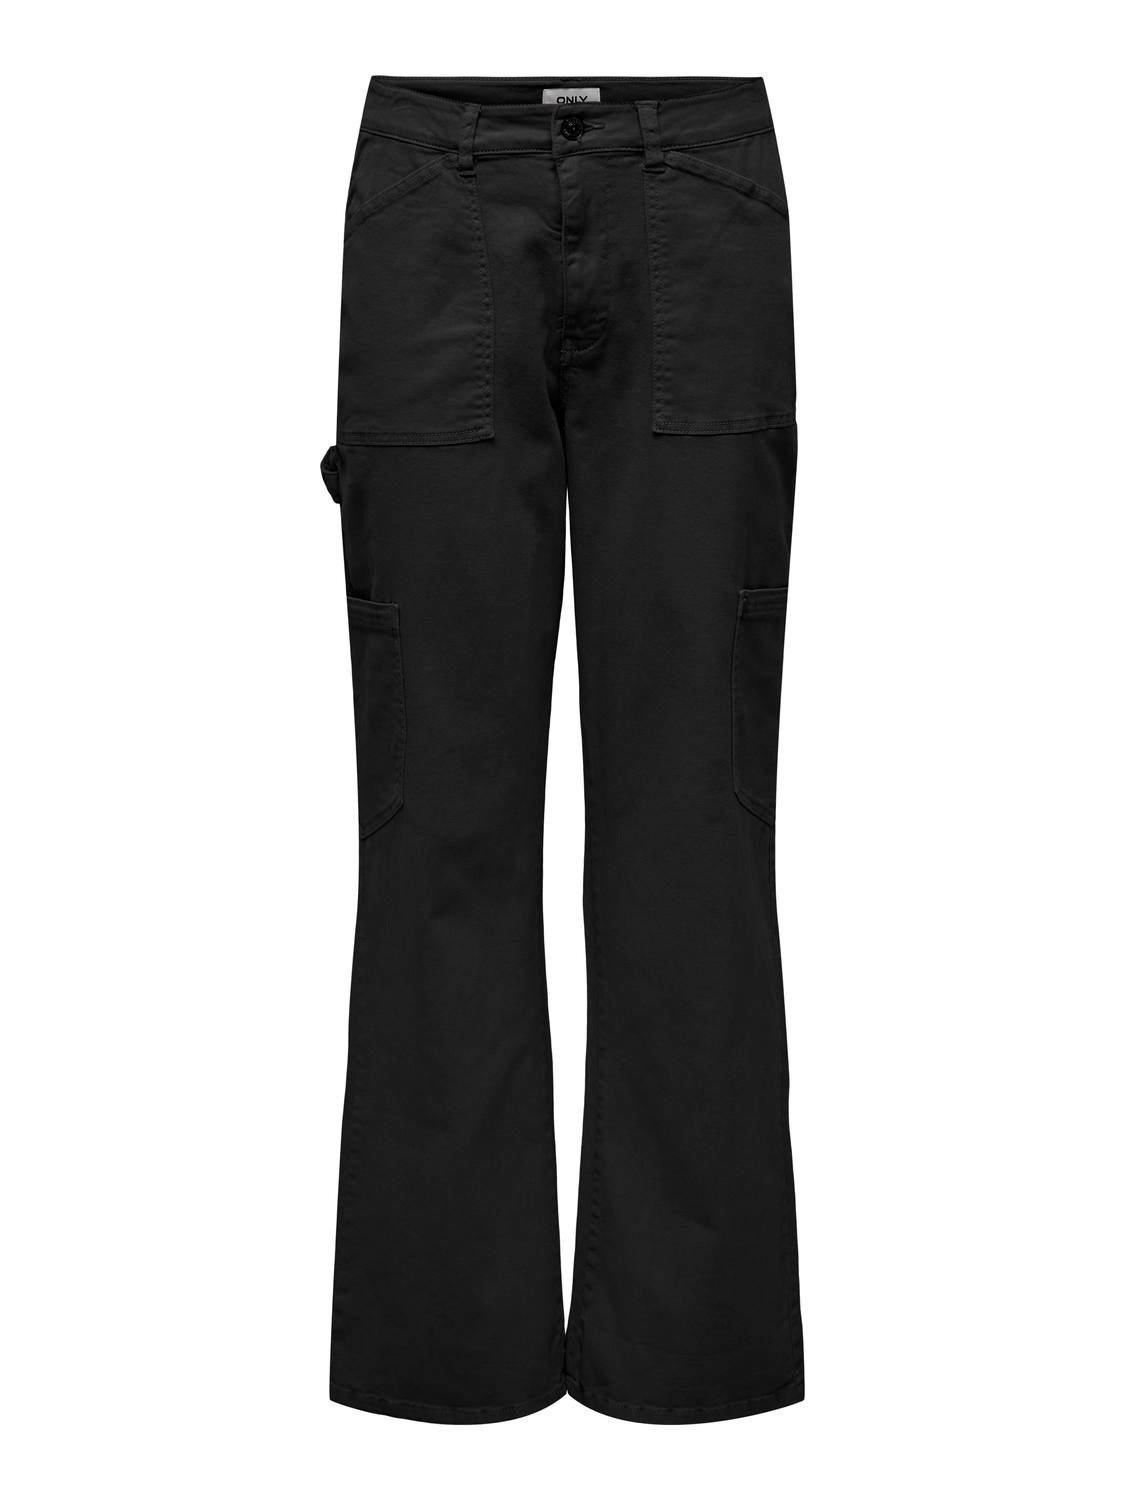 ONLY Carrot Fit High waist Trousers -Black - 15289025